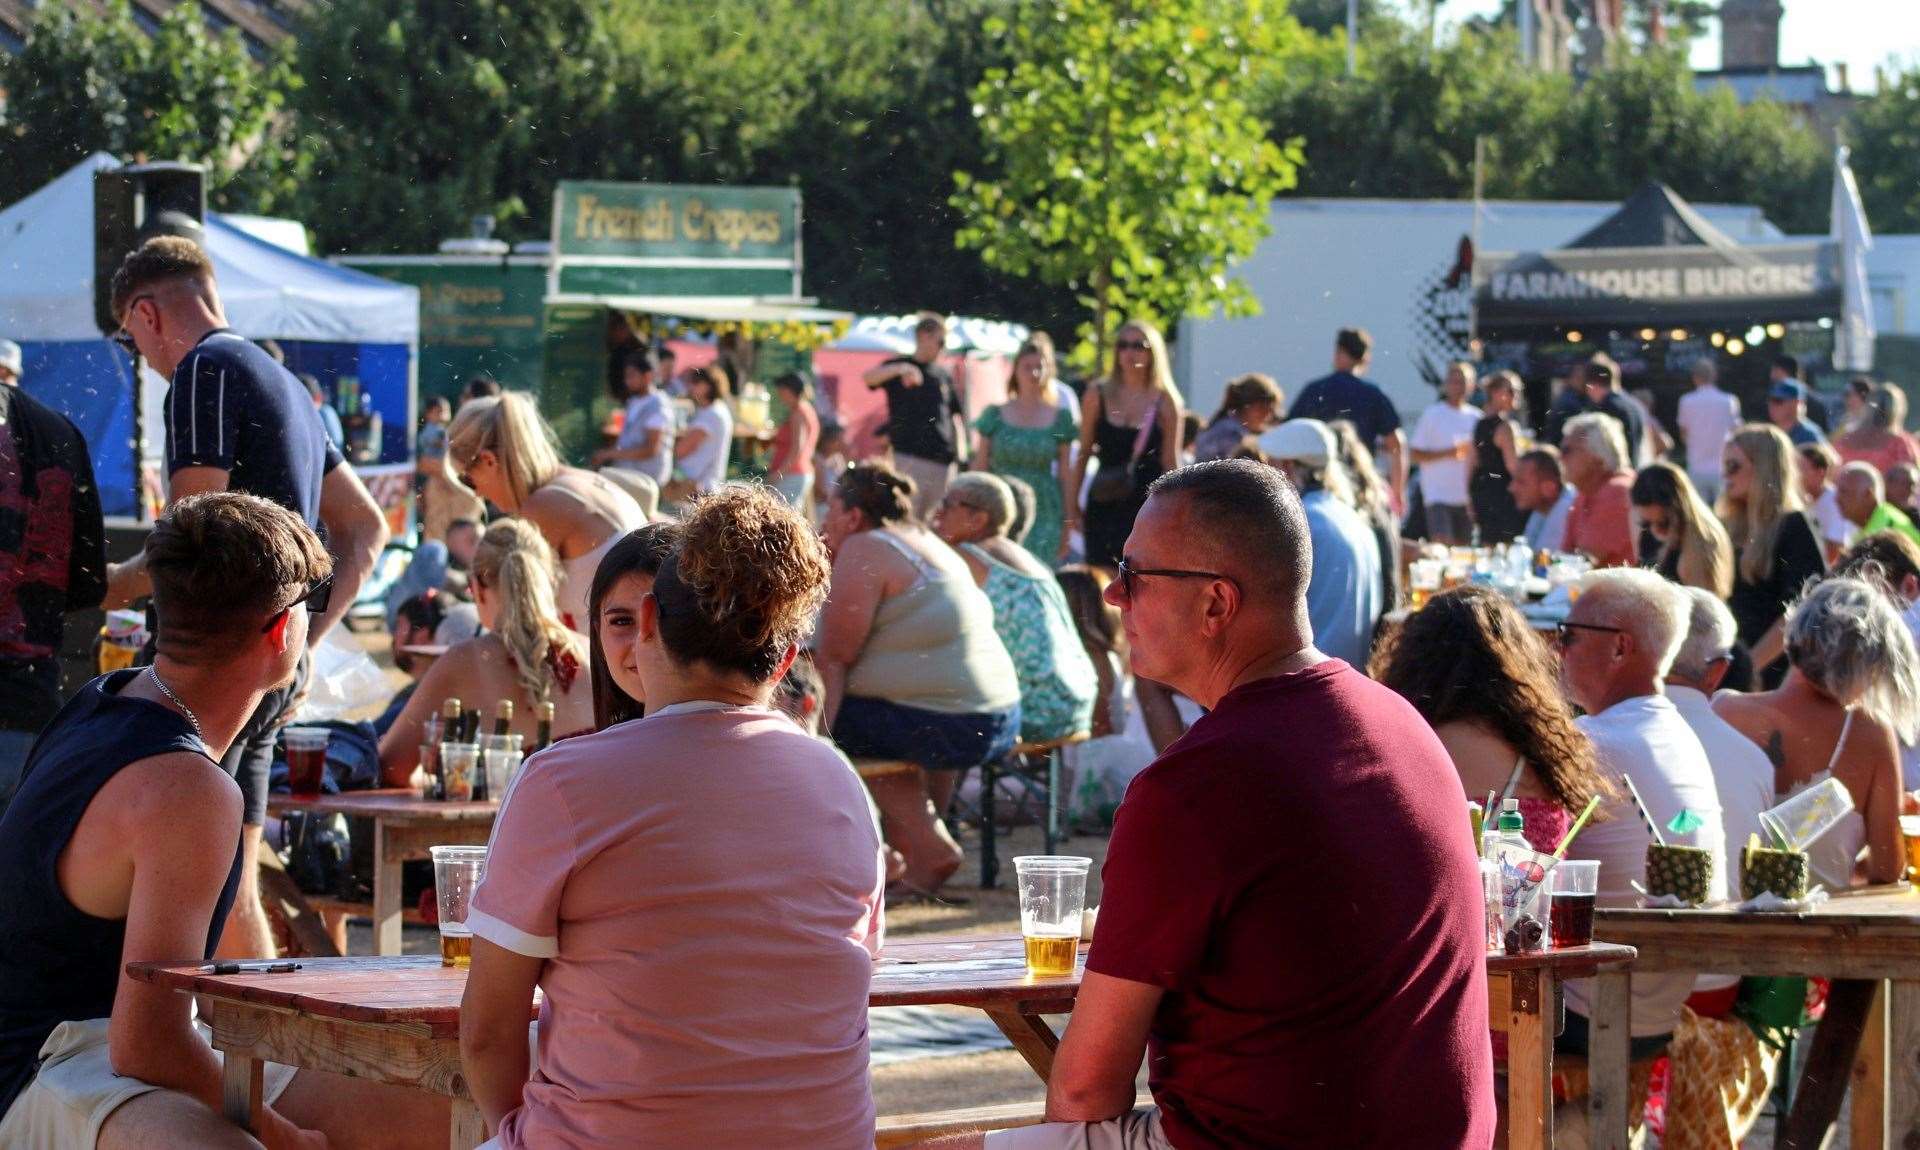 Rochester Castle hosted the first Medway Food and Drink Festival last year